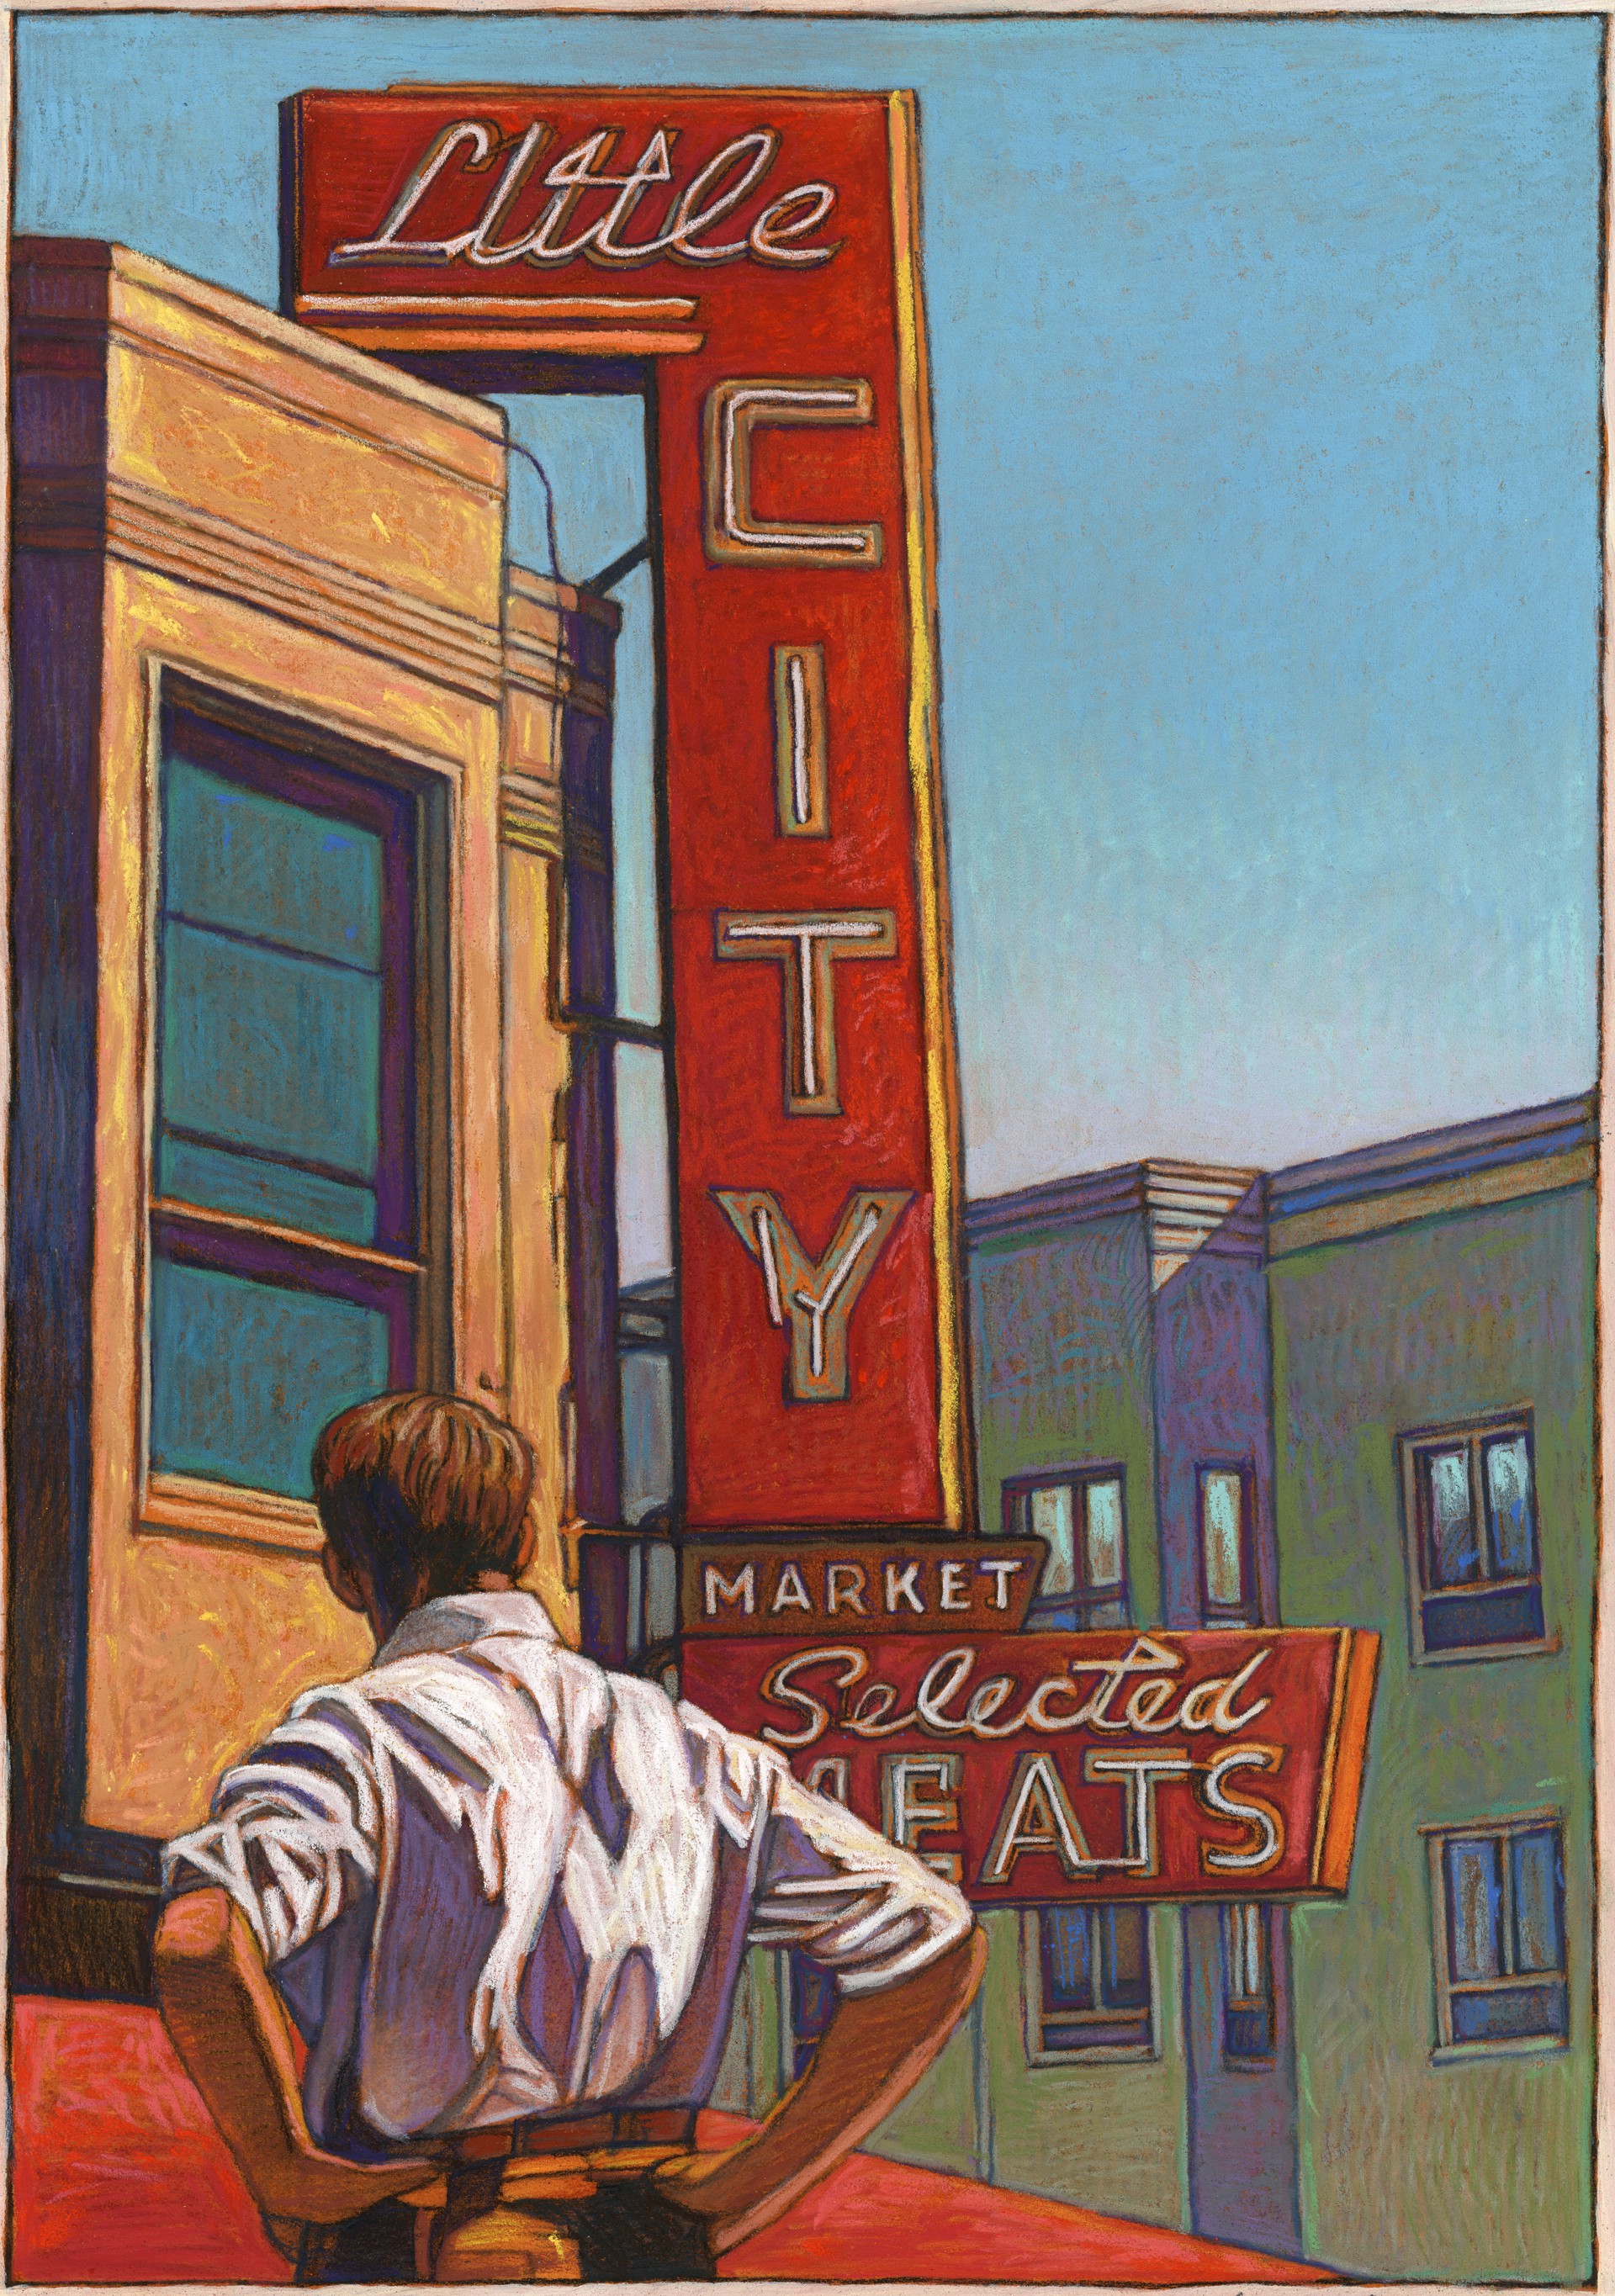 Little City Market: Reflections on Mid-20th Century San Francisco by Miles Hyman